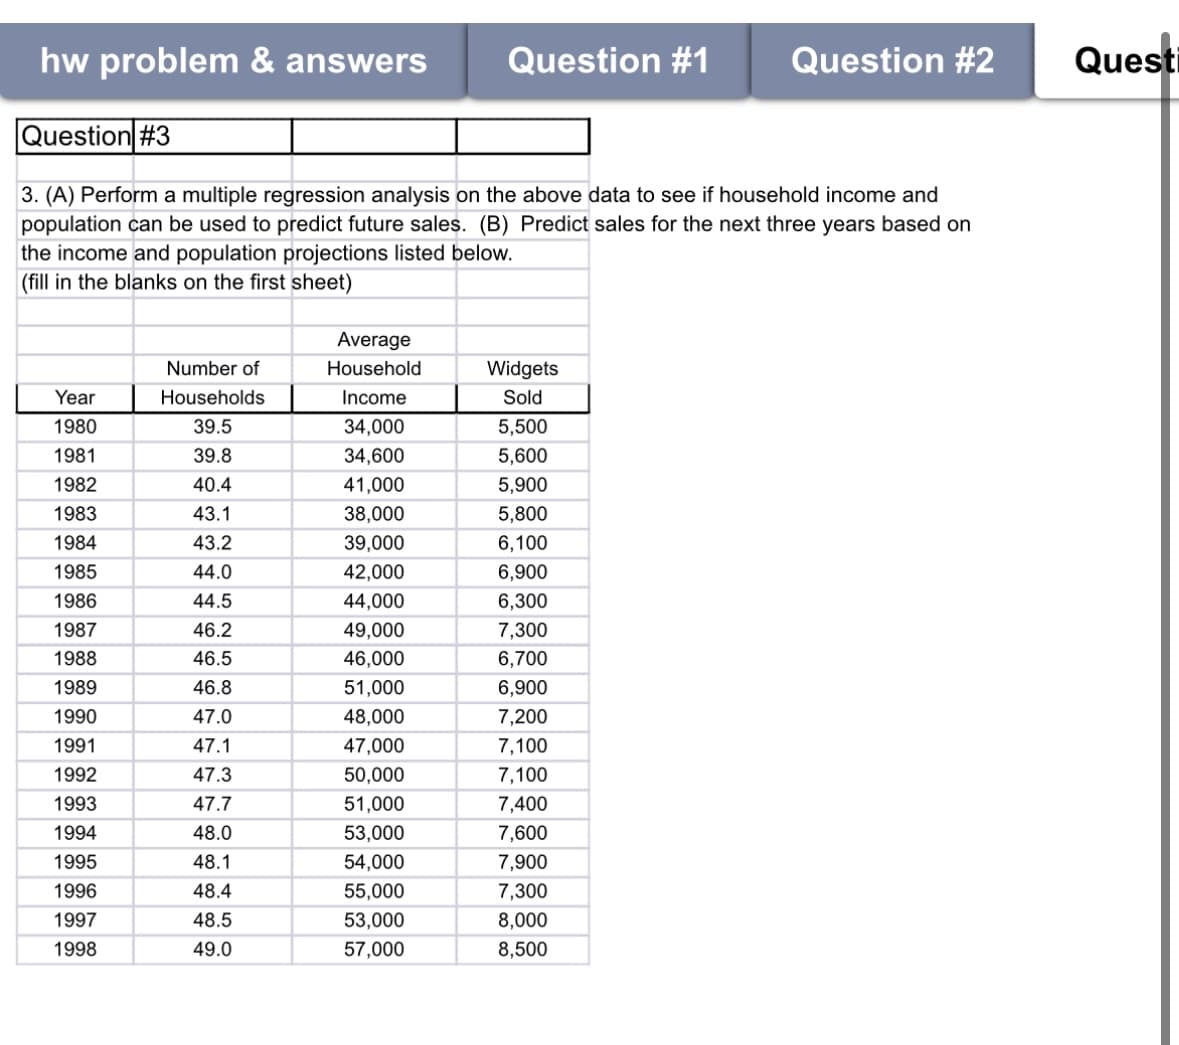 hw problem & answers
Question #1
Question #2
Quest
Question #3
3. (A) Perform a multiple regression analysis on the above data to see if household income and
population can be used to predict future sales. (B) Predict sales for the next three years based on
the income and population projections listed below.
(fill in the blanks on the first sheet)
Average
Number of
Household
Widgets
Year
Households
Income
Sold
1980
39.5
34,000
5,500
1981
39.8
34,600
5,600
1982
40.4
41,000
5,900
1983
43.1
38,000
5,800
1984
43.2
39,000
6,100
1985
44.0
42,000
6,900
1986
44.5
44,000
6,300
1987
46.2
49,000
7,300
1988
46.5
46,000
6,700
1989
46.8
51,000
6,900
1990
47.0
48,000
7,200
1991
47.1
47,000
7,100
1992
47.3
50,000
7,100
1993
47.7
51,000
7,400
1994
48.0
53,000
7,600
1995
48.1
54,000
7,900
1996
48.4
55,000
7,300
1997
48.5
53,000
8,000
1998
49.0
57,000
8,500